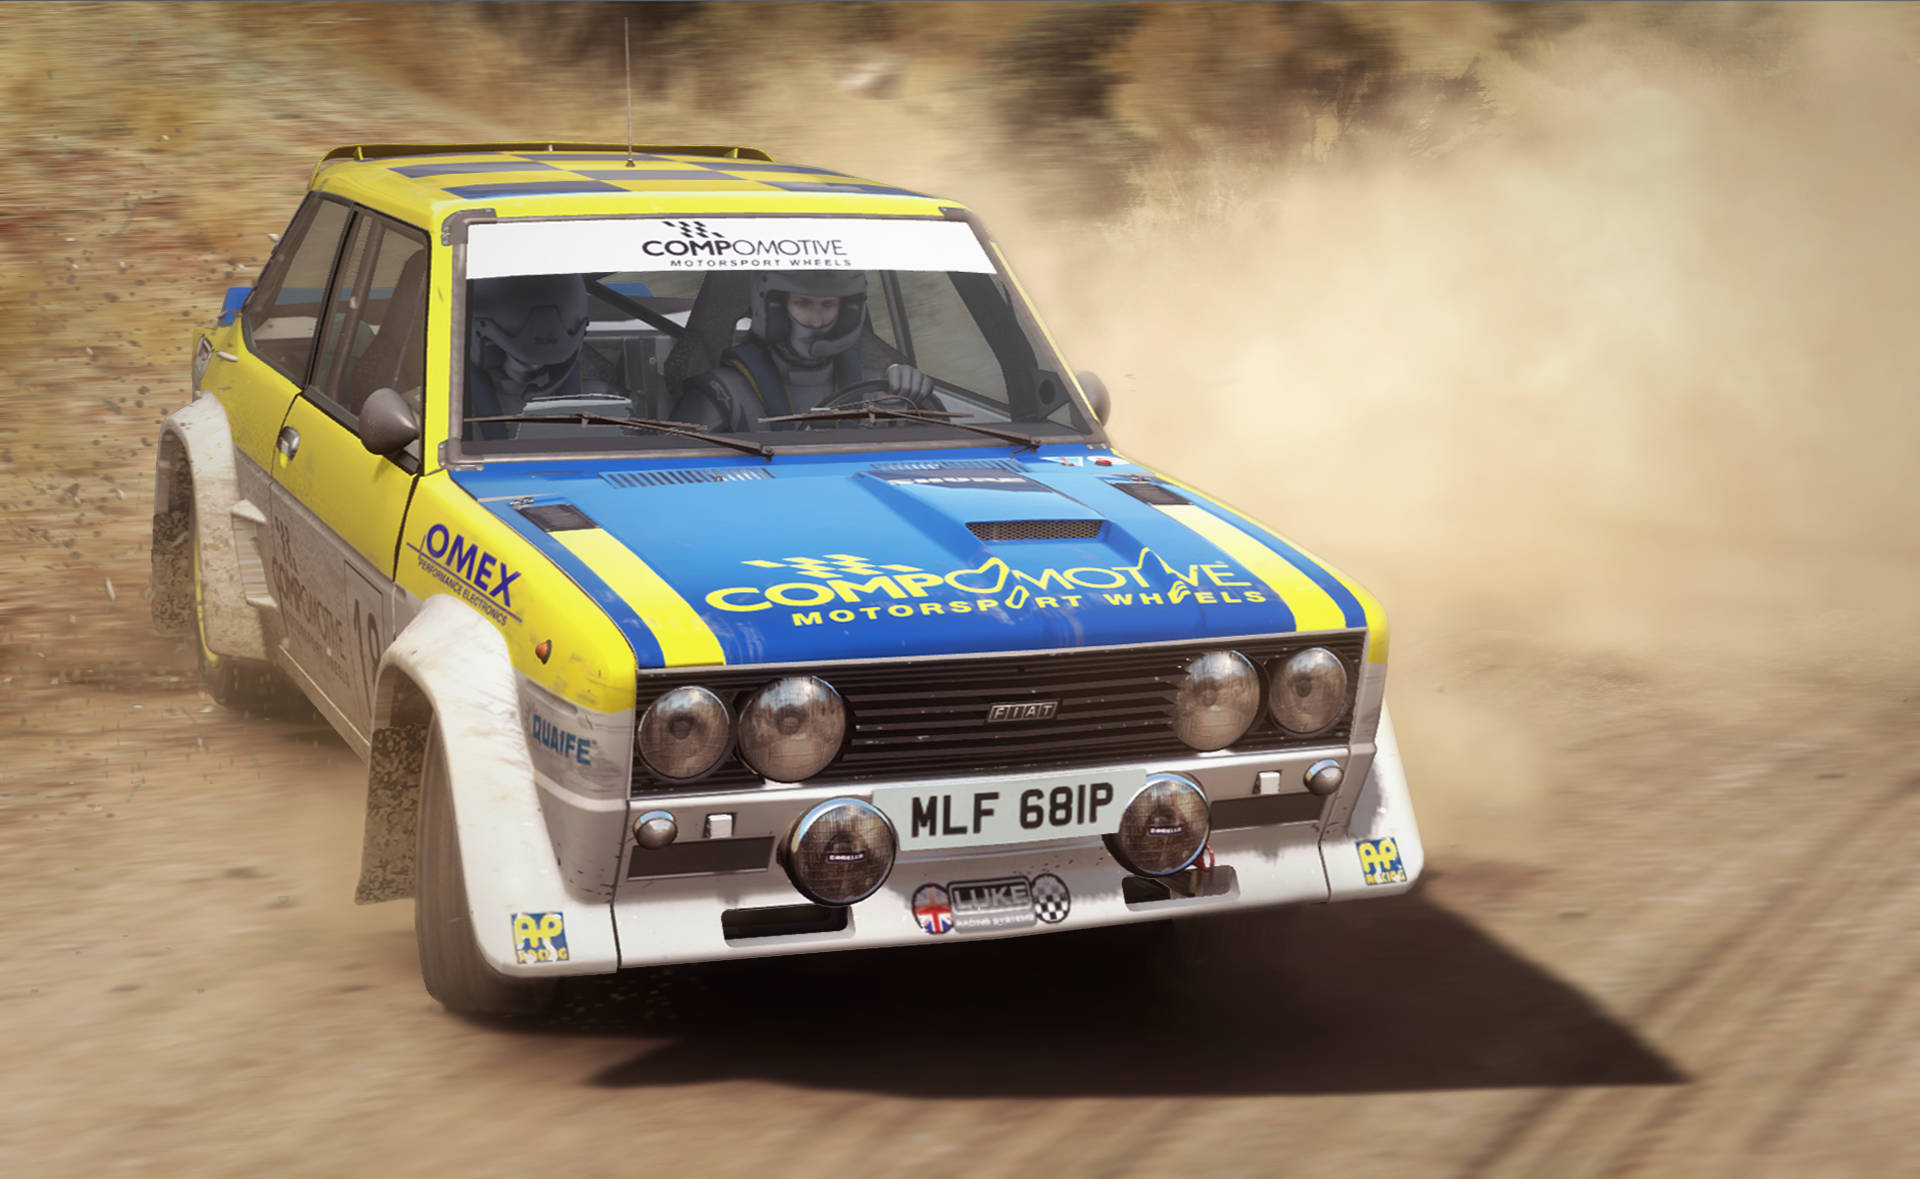 Caption: Dazzling Drive - A Dirt Rally Racing Event In Full Swing. Wallpaper